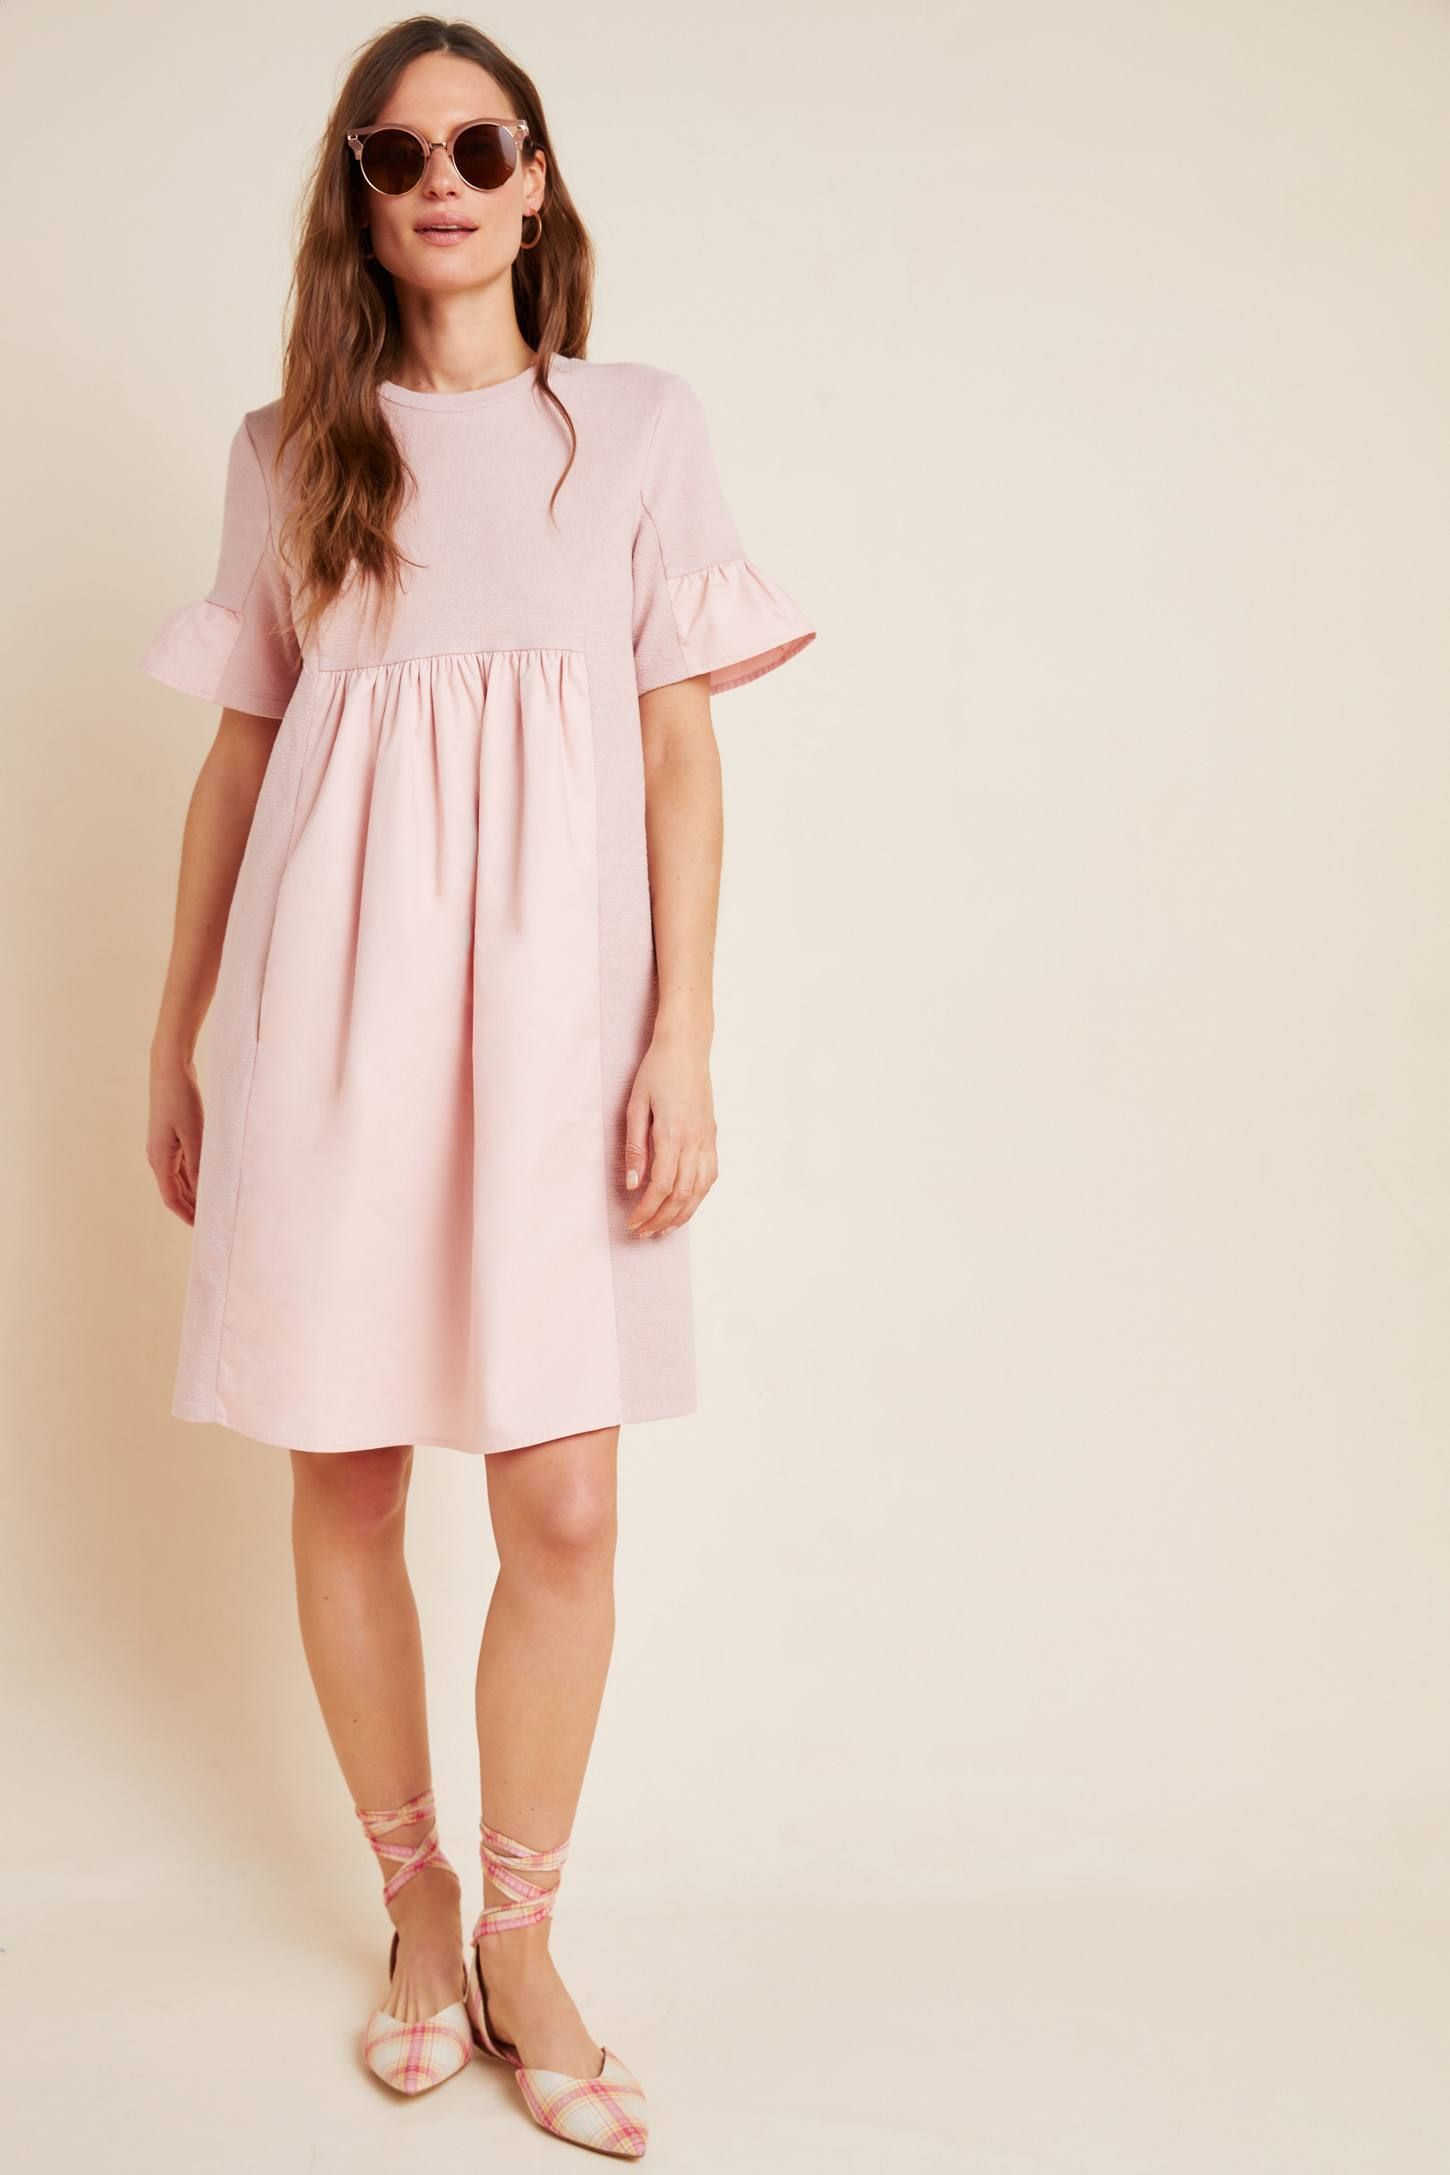 informal dresses to wear to a wedding